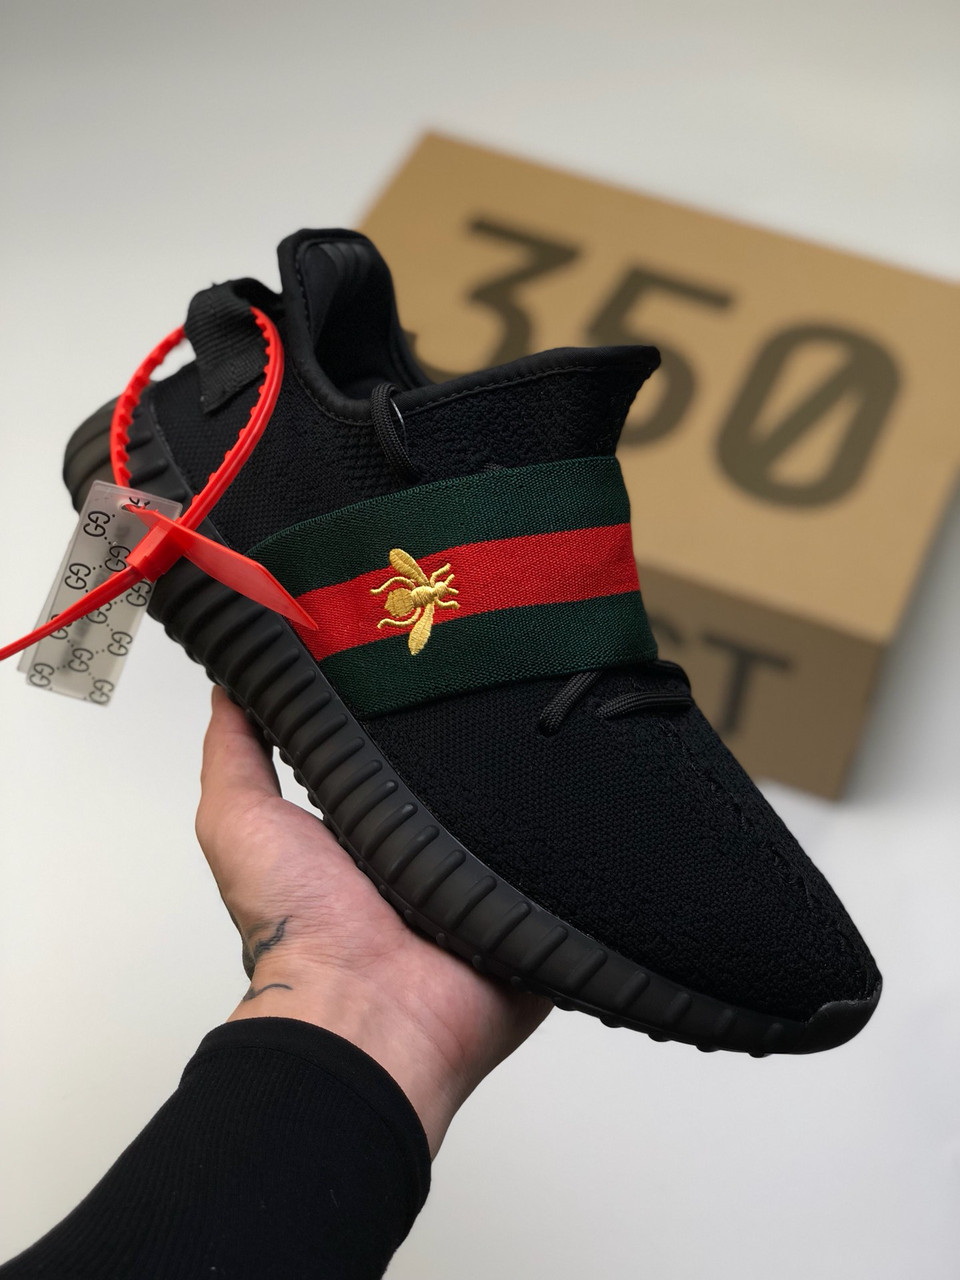 Adidas Yeezy Gucci on Sale - playgrowned.com 1687746137